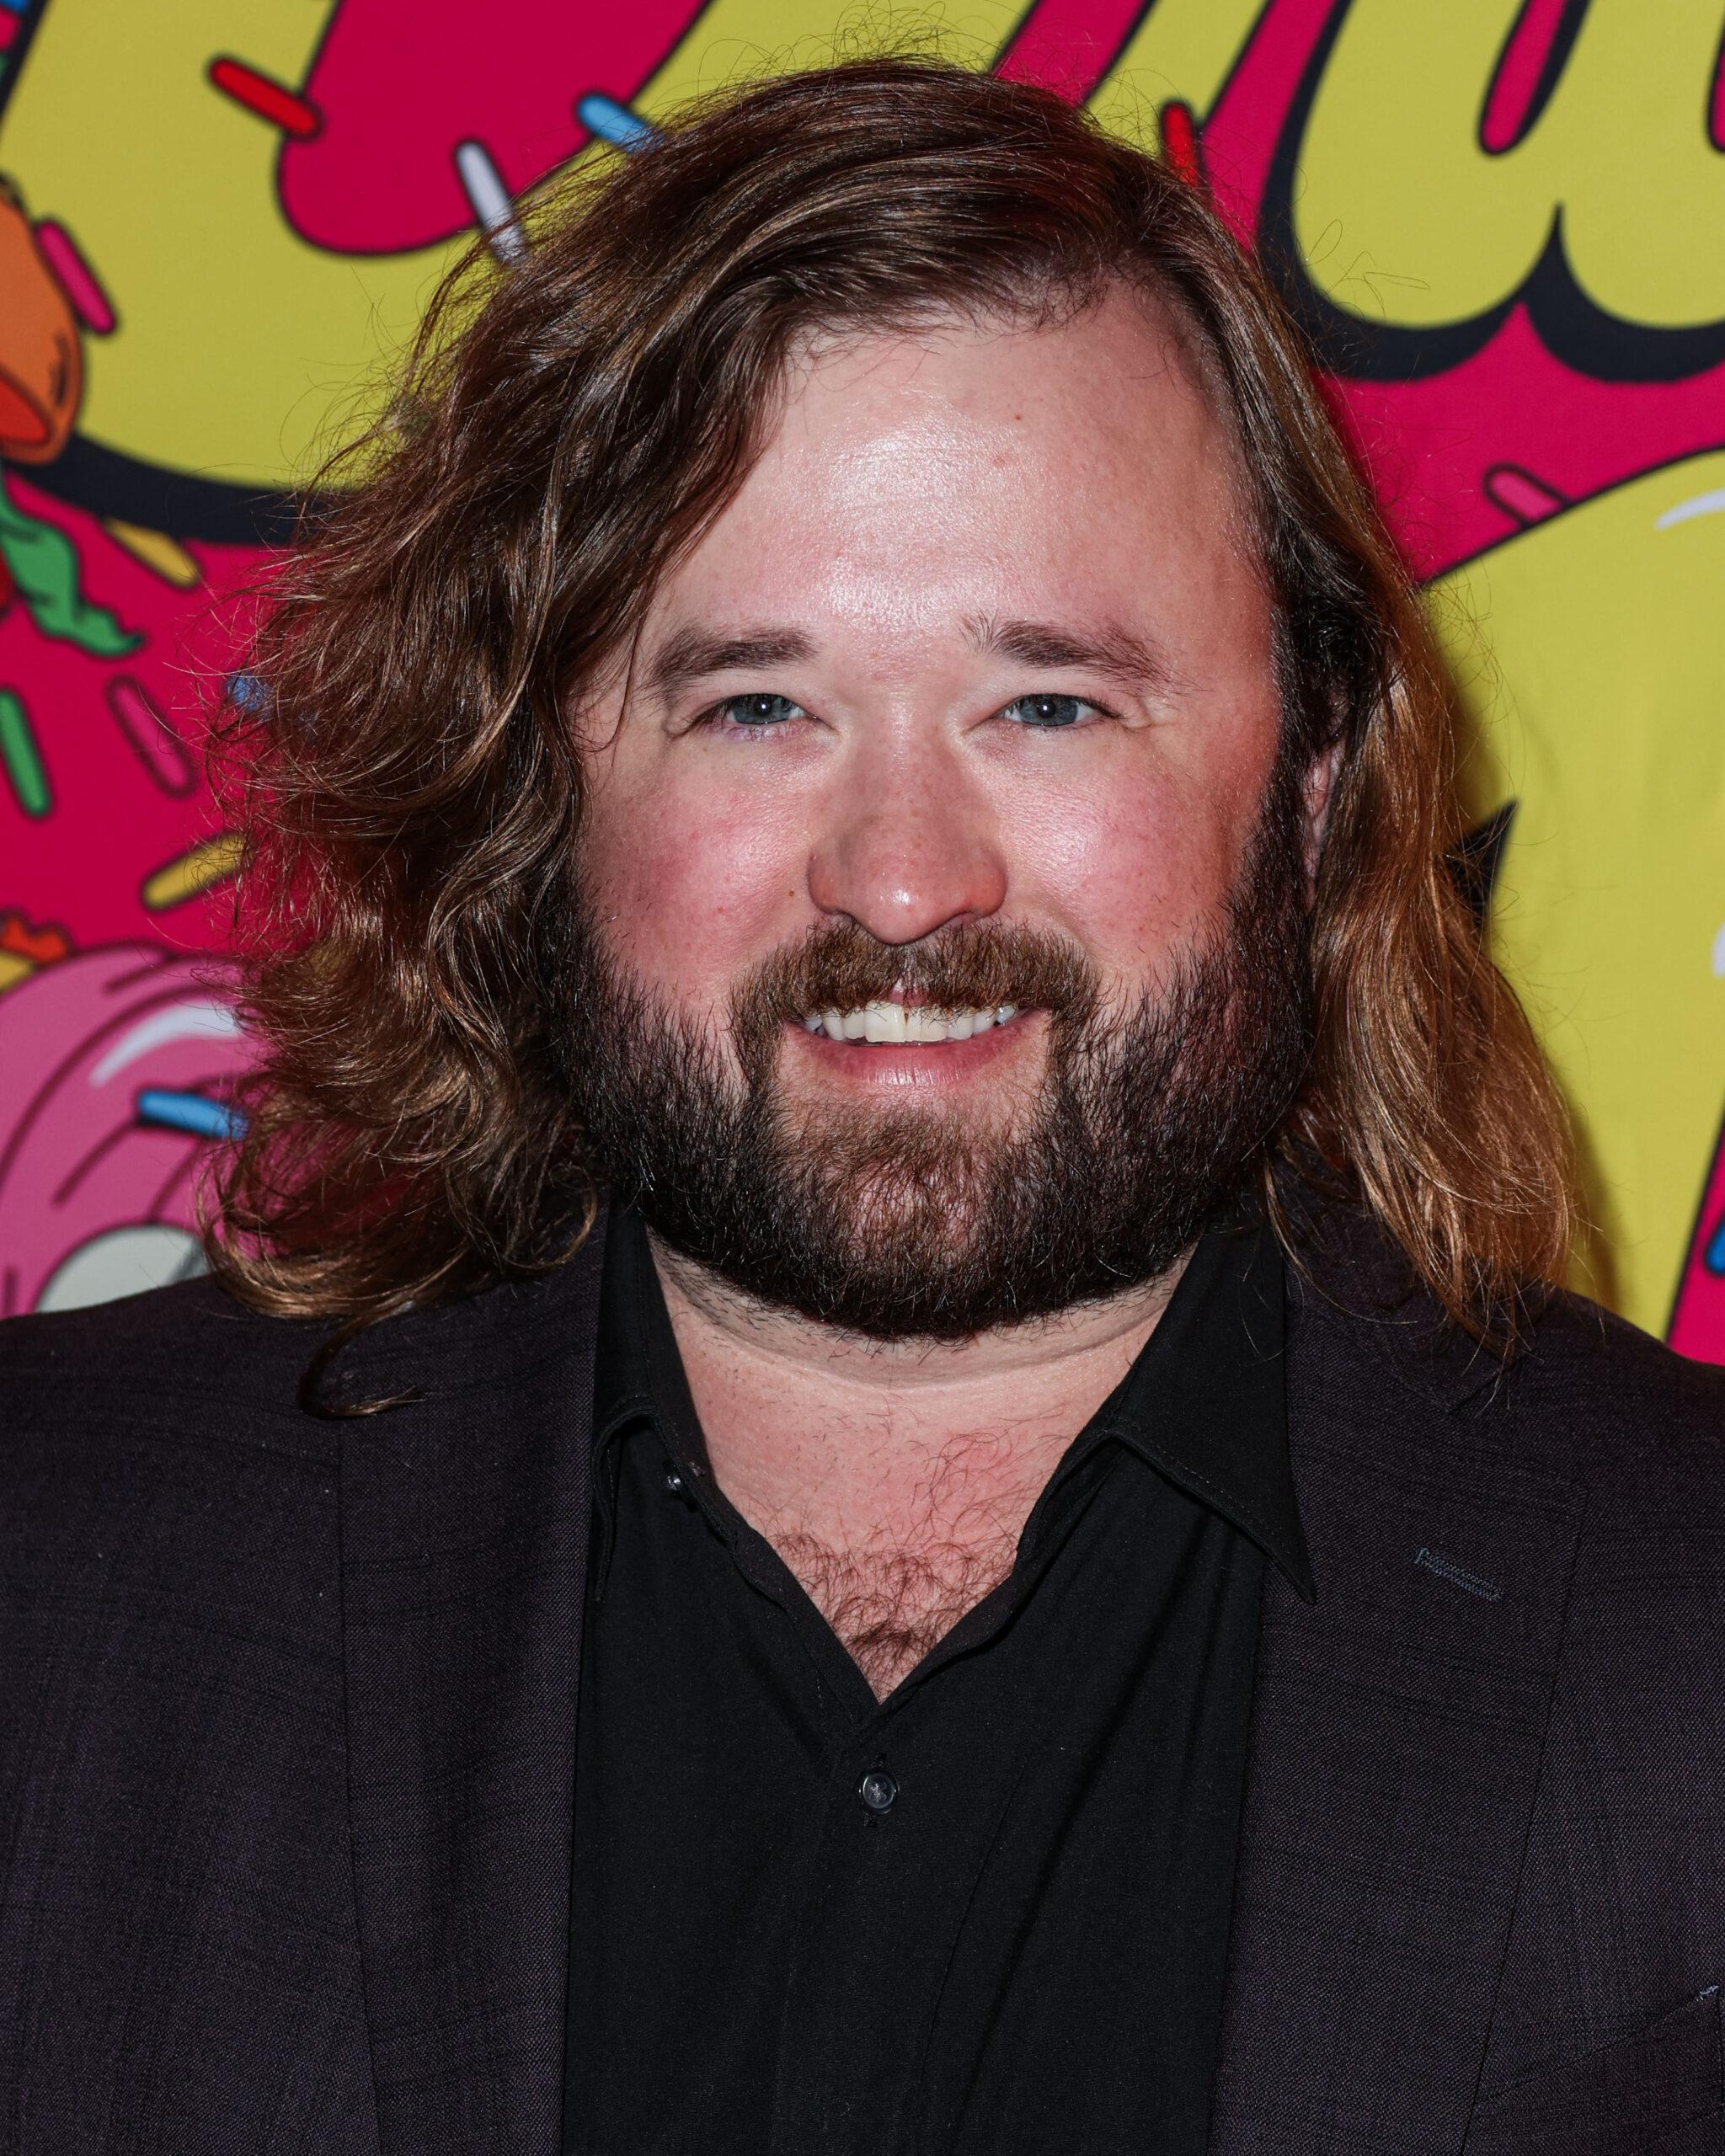 Kendrick Lamar Disses Haley Joel Osment In New Track, But Fails Epically